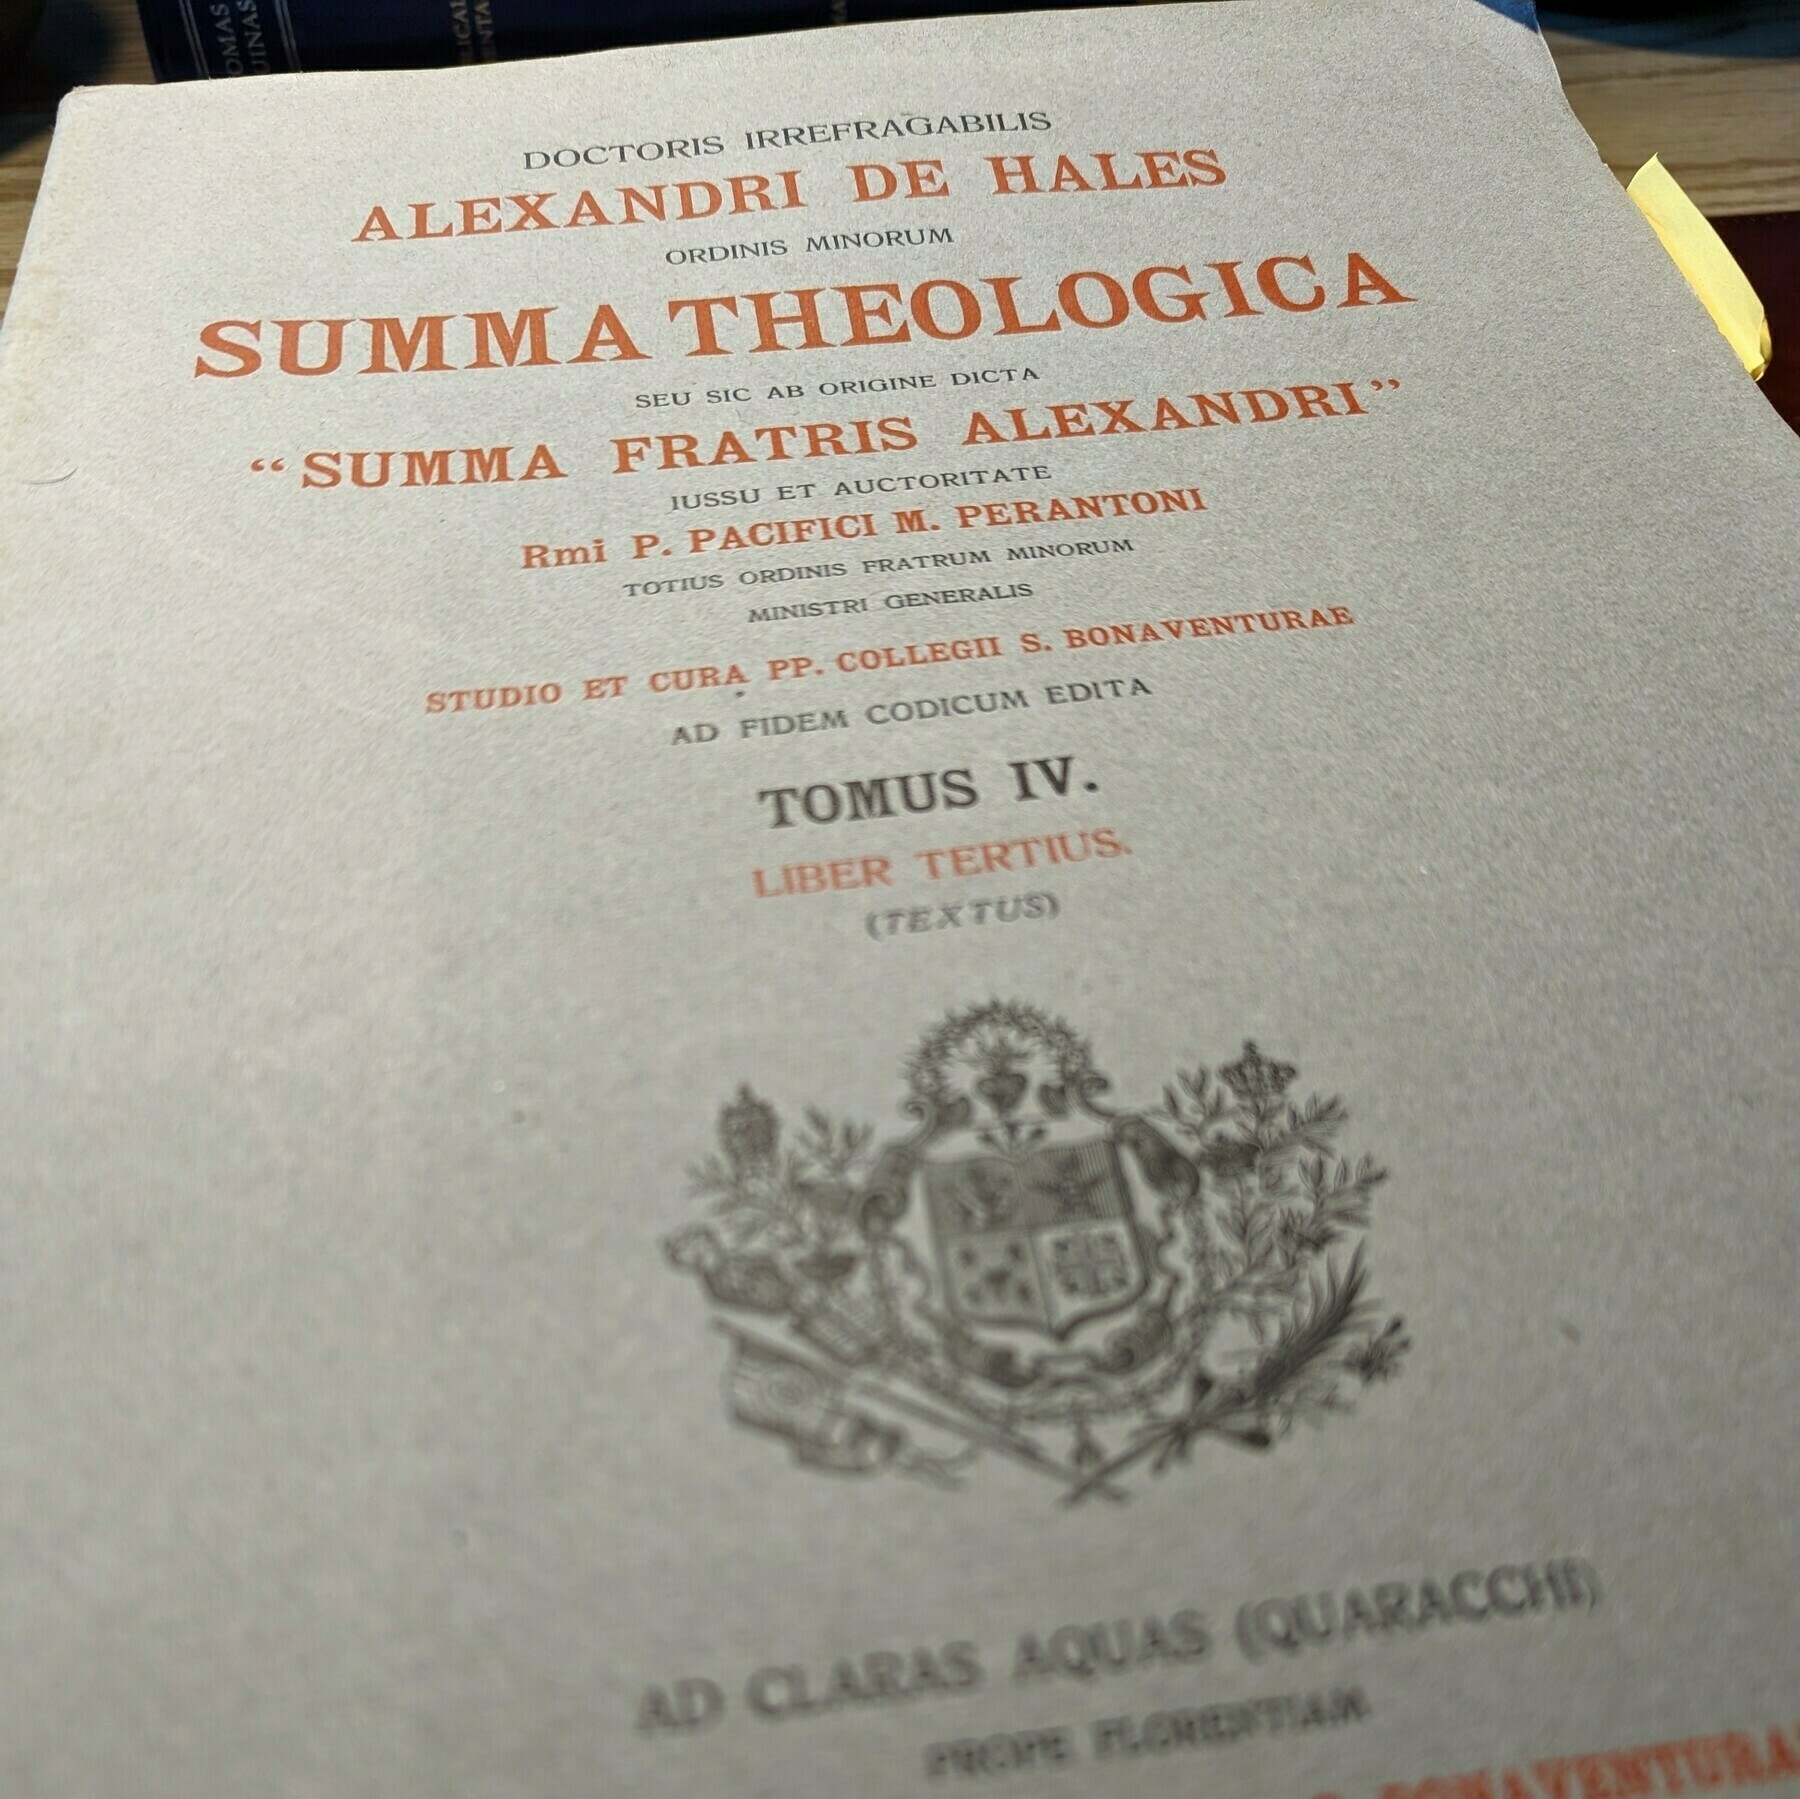 Title page of the Summa Halensis